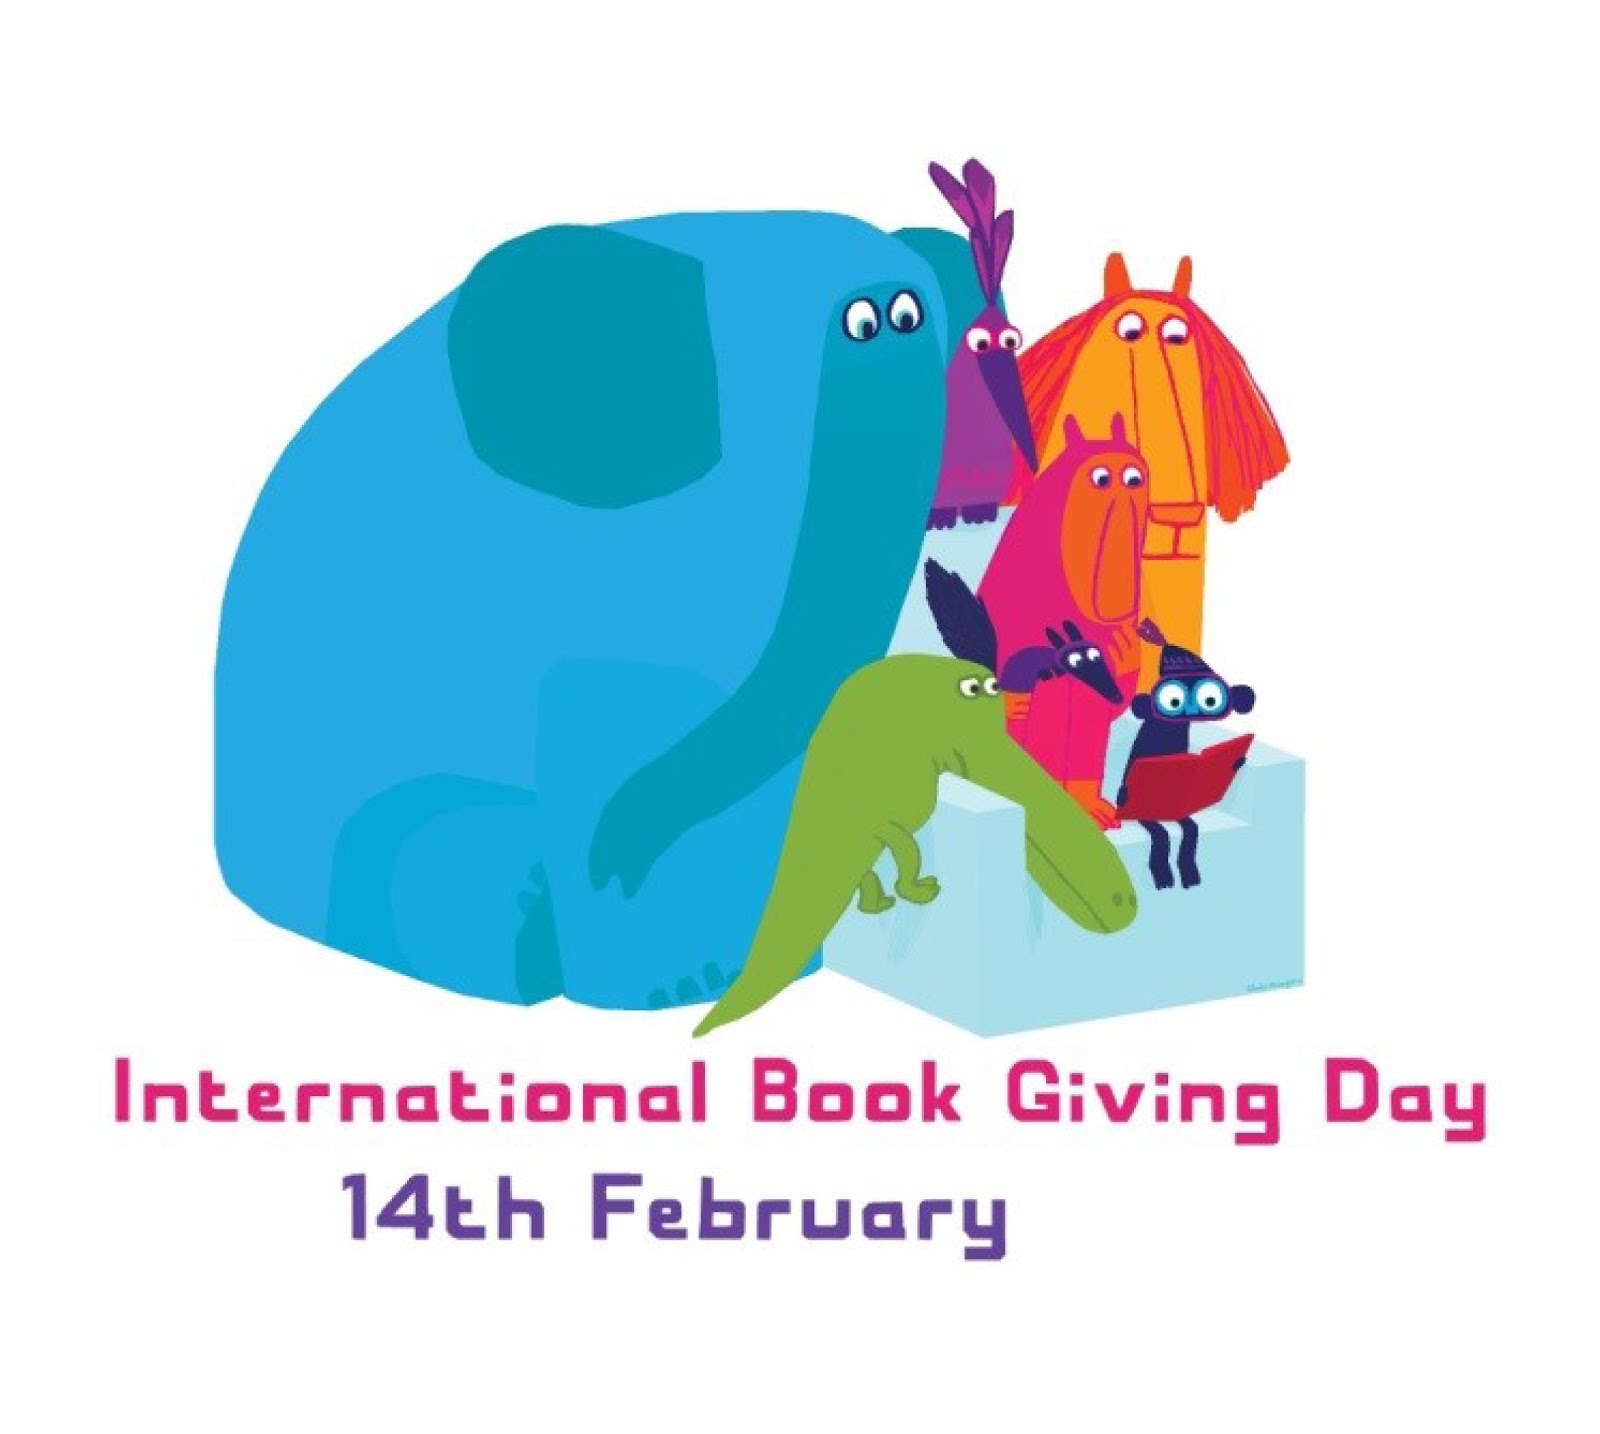 Bookgiving Day 2019